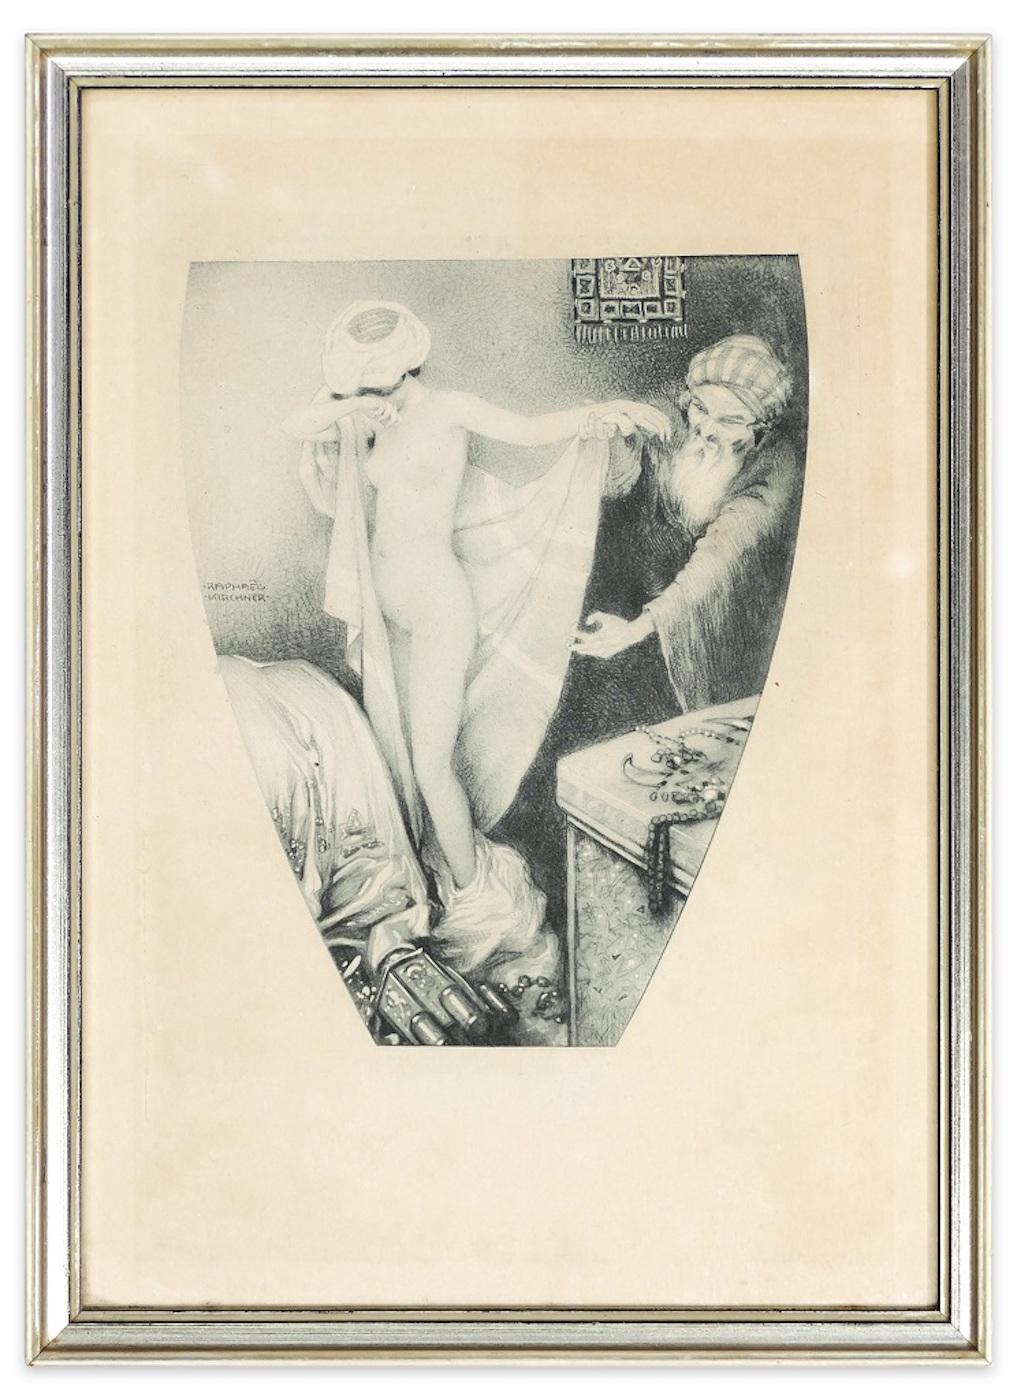 One Thousand and One Night - The Presentation - 1906 - Print by Raphael Kirchner